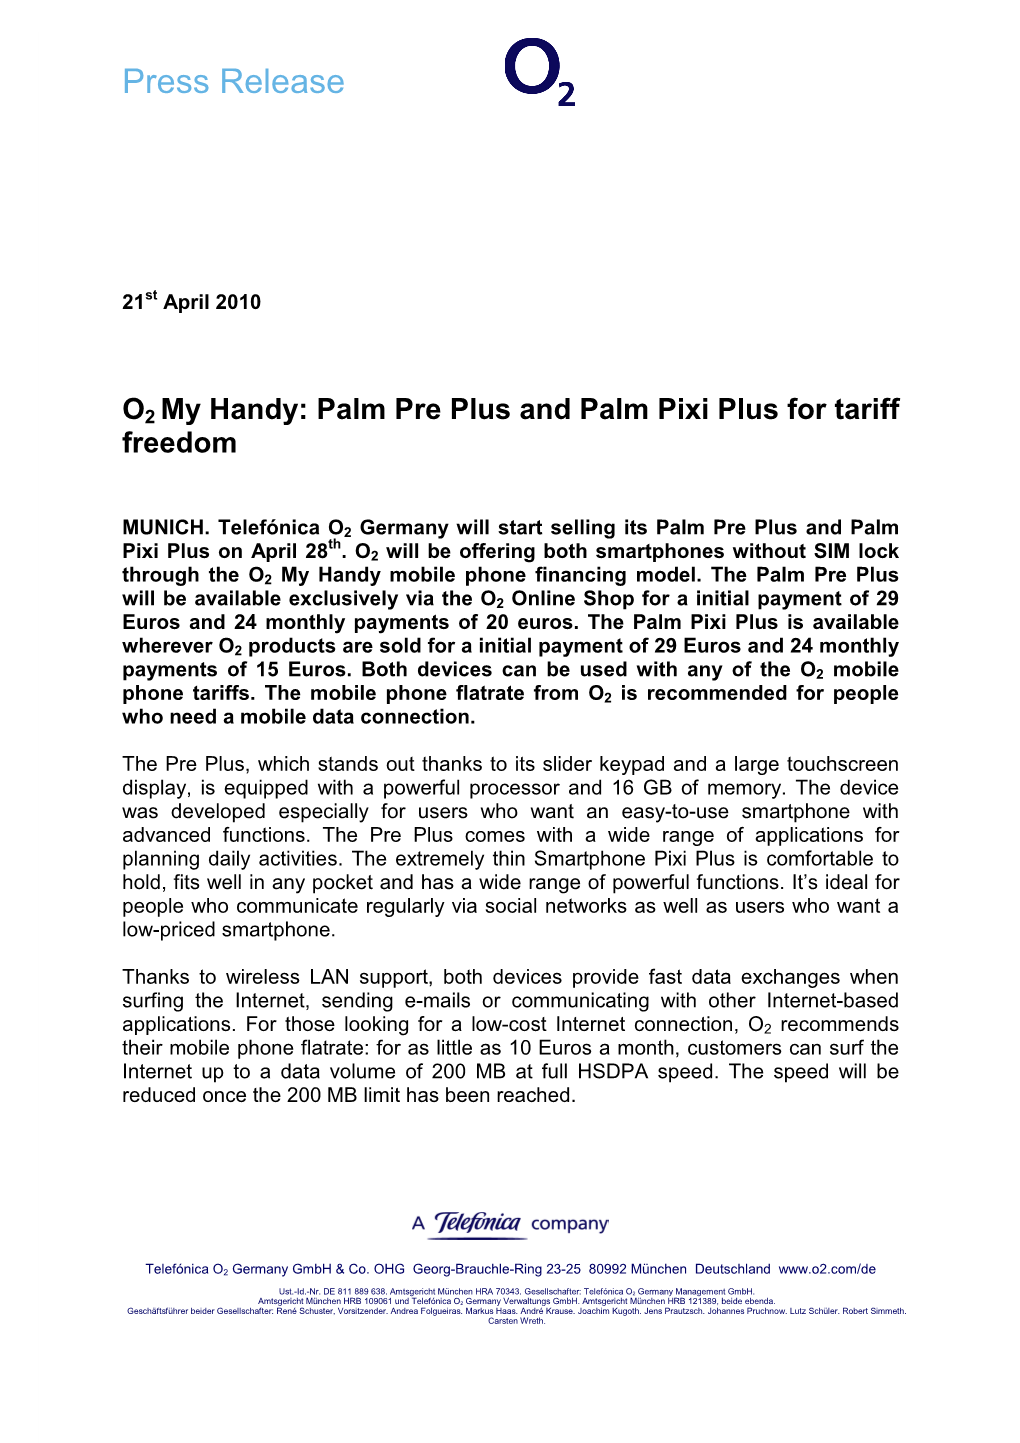 Palm Pre Plus and Palm Pixi Plus for Tariff Freedom